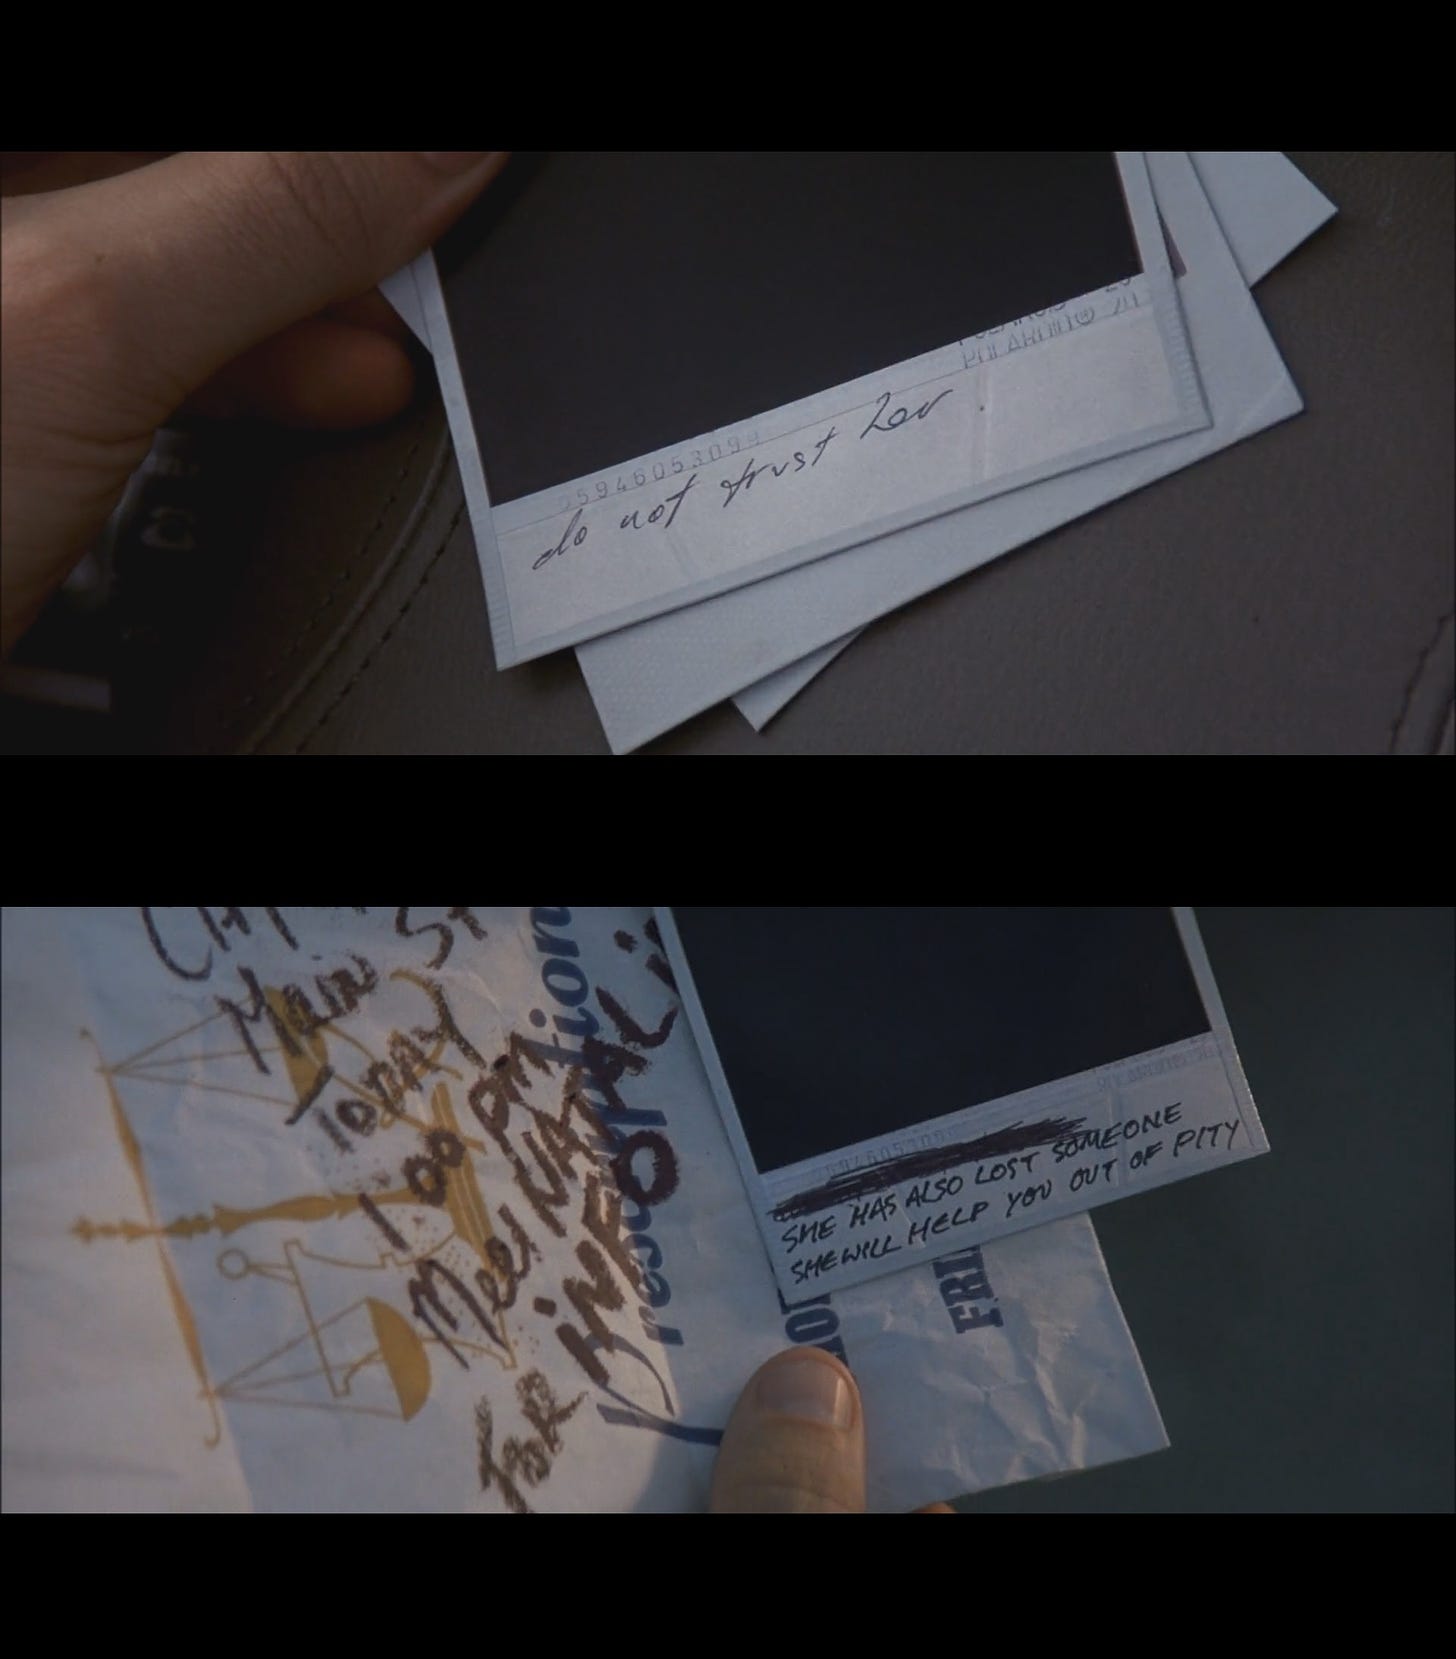 In 'Memento', Lenny tells us in the beginning that you learn to trust your  own hand writing. When Teddy pressurizes him to write something about  Natalie, he doesn't use his normal hand